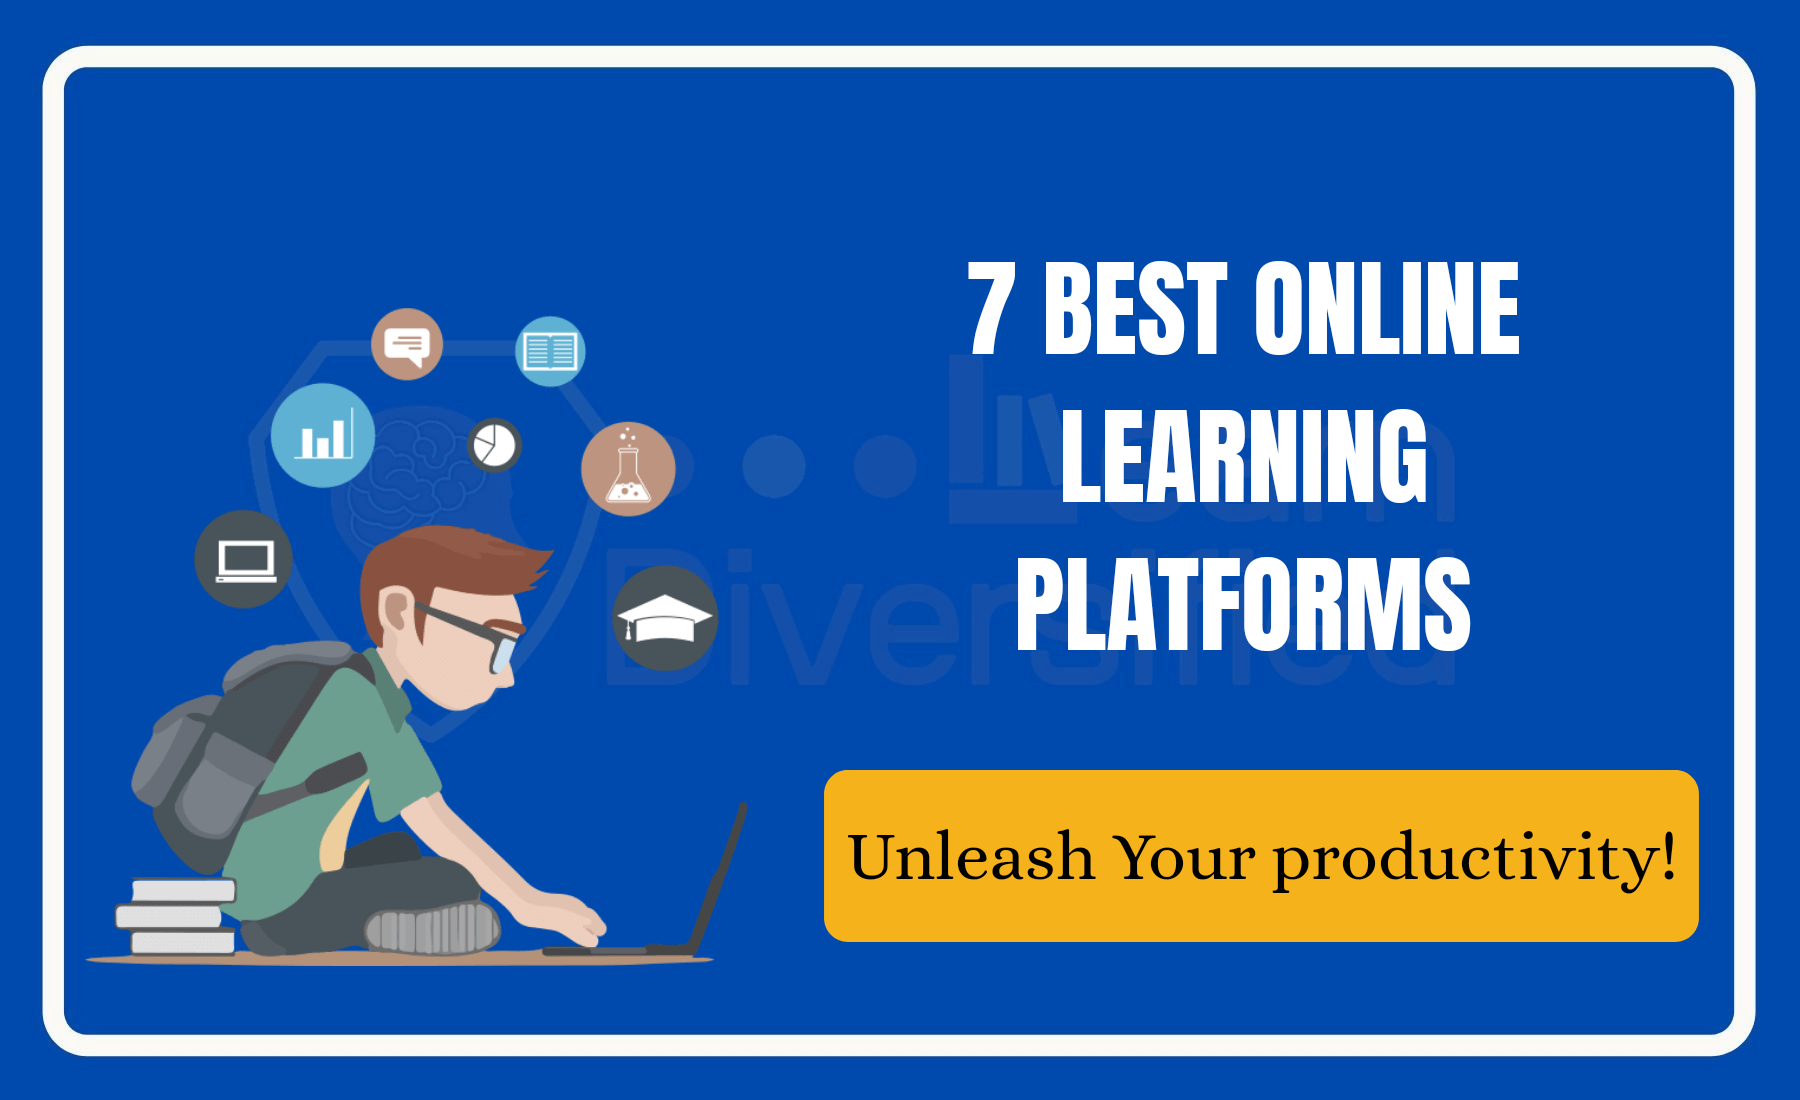 7 Best Online Learning Platforms to Unleash your Productivity! Learn